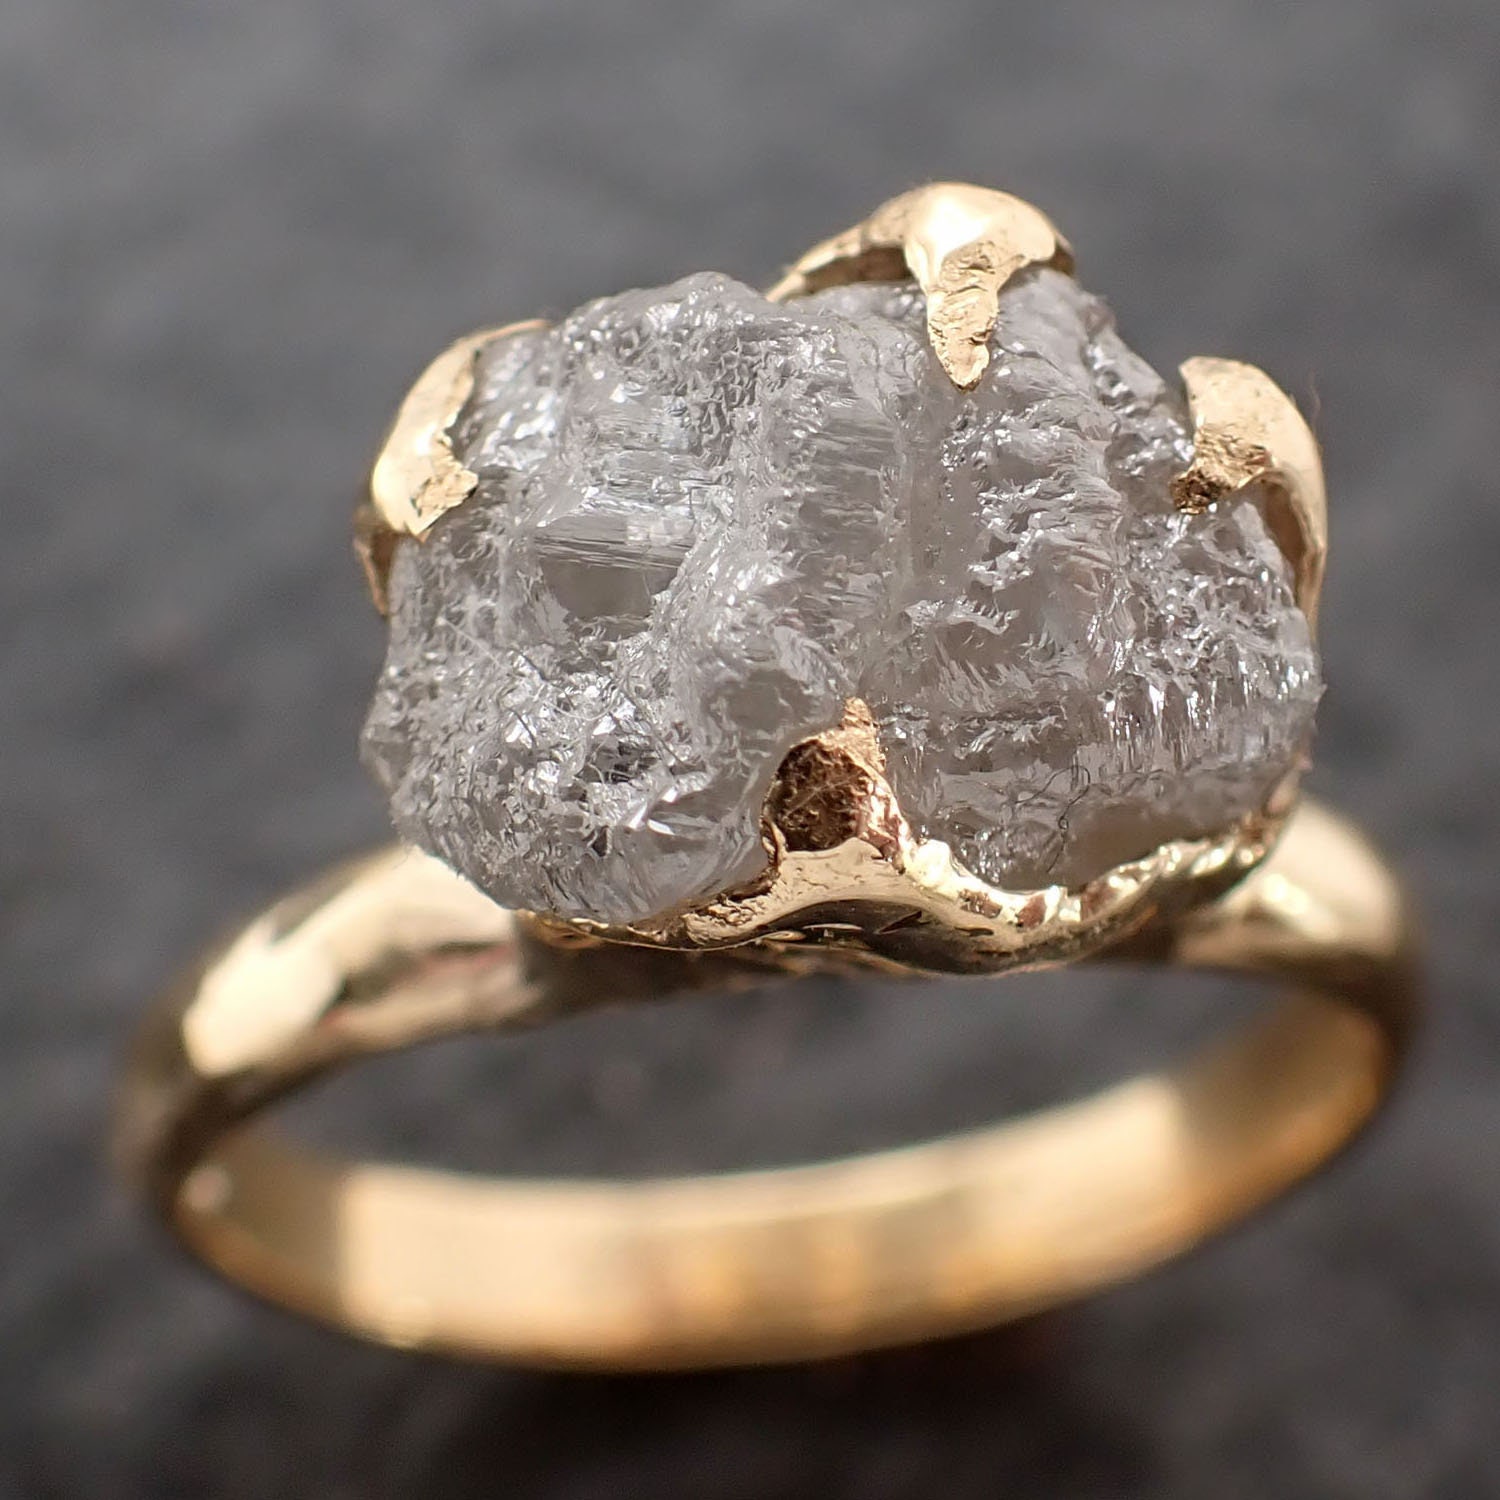 21 Rough Diamond Engagement Rings That Are One of a Kind